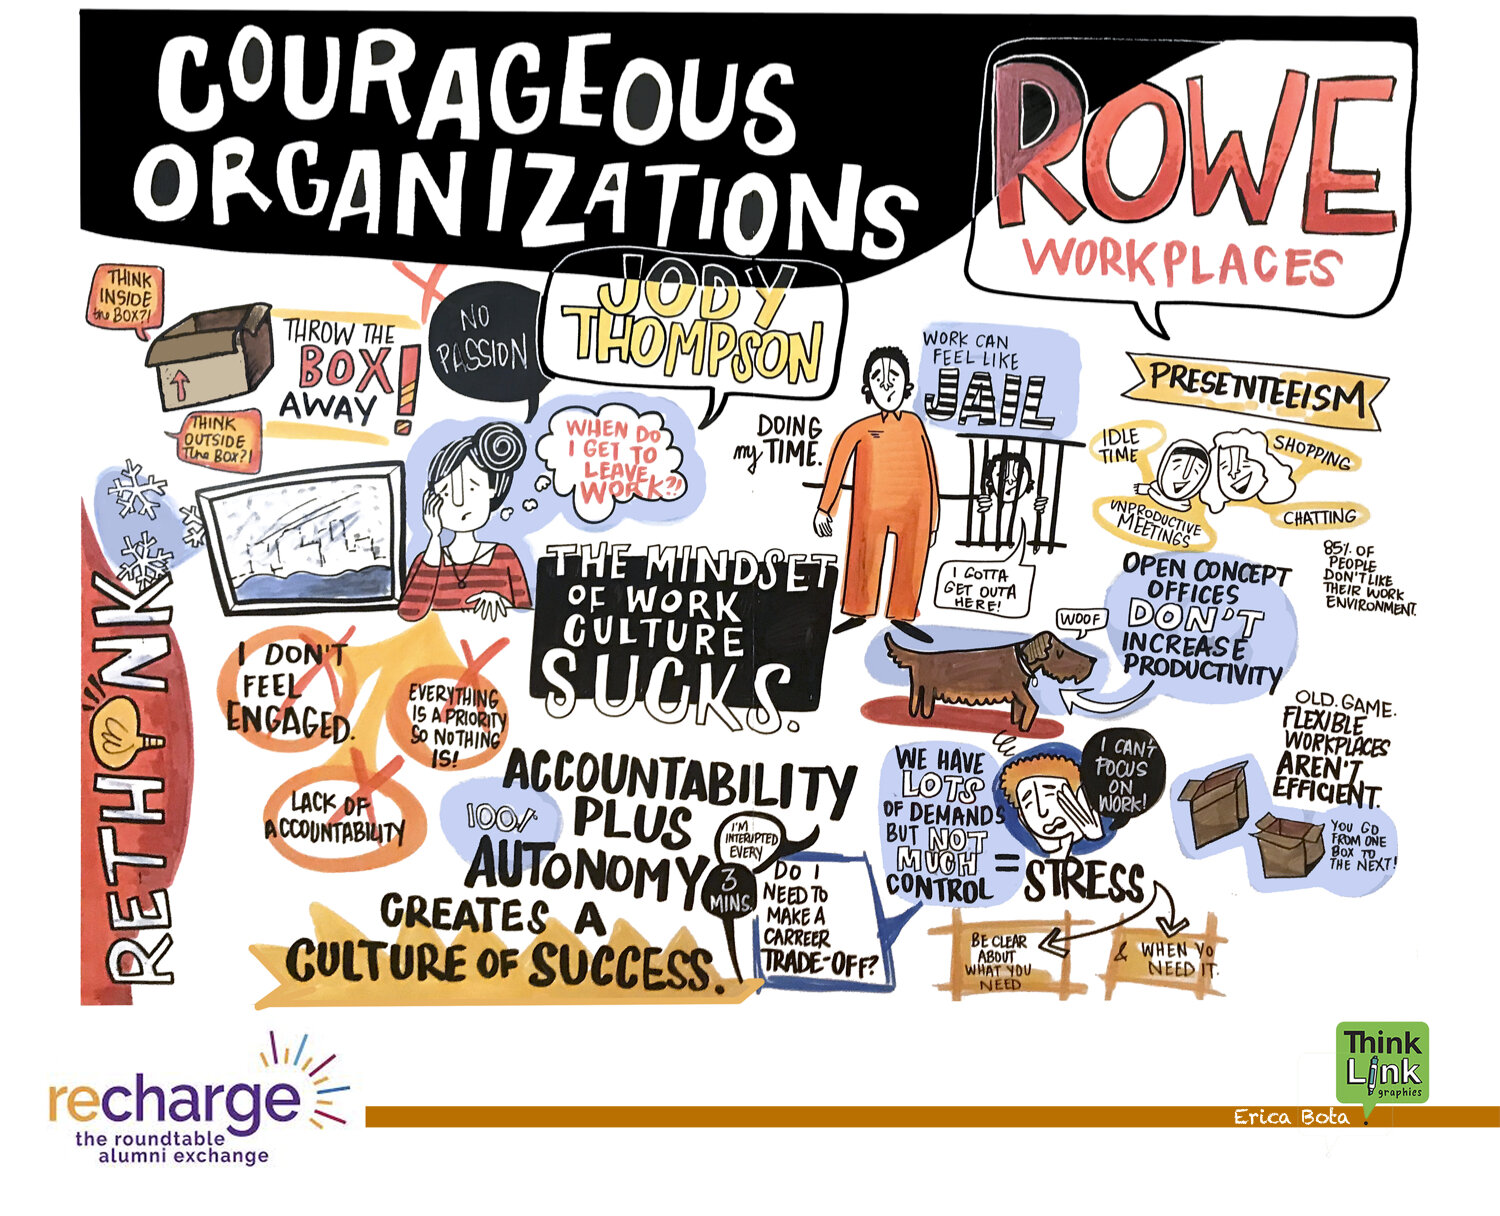 Courageous Organizations